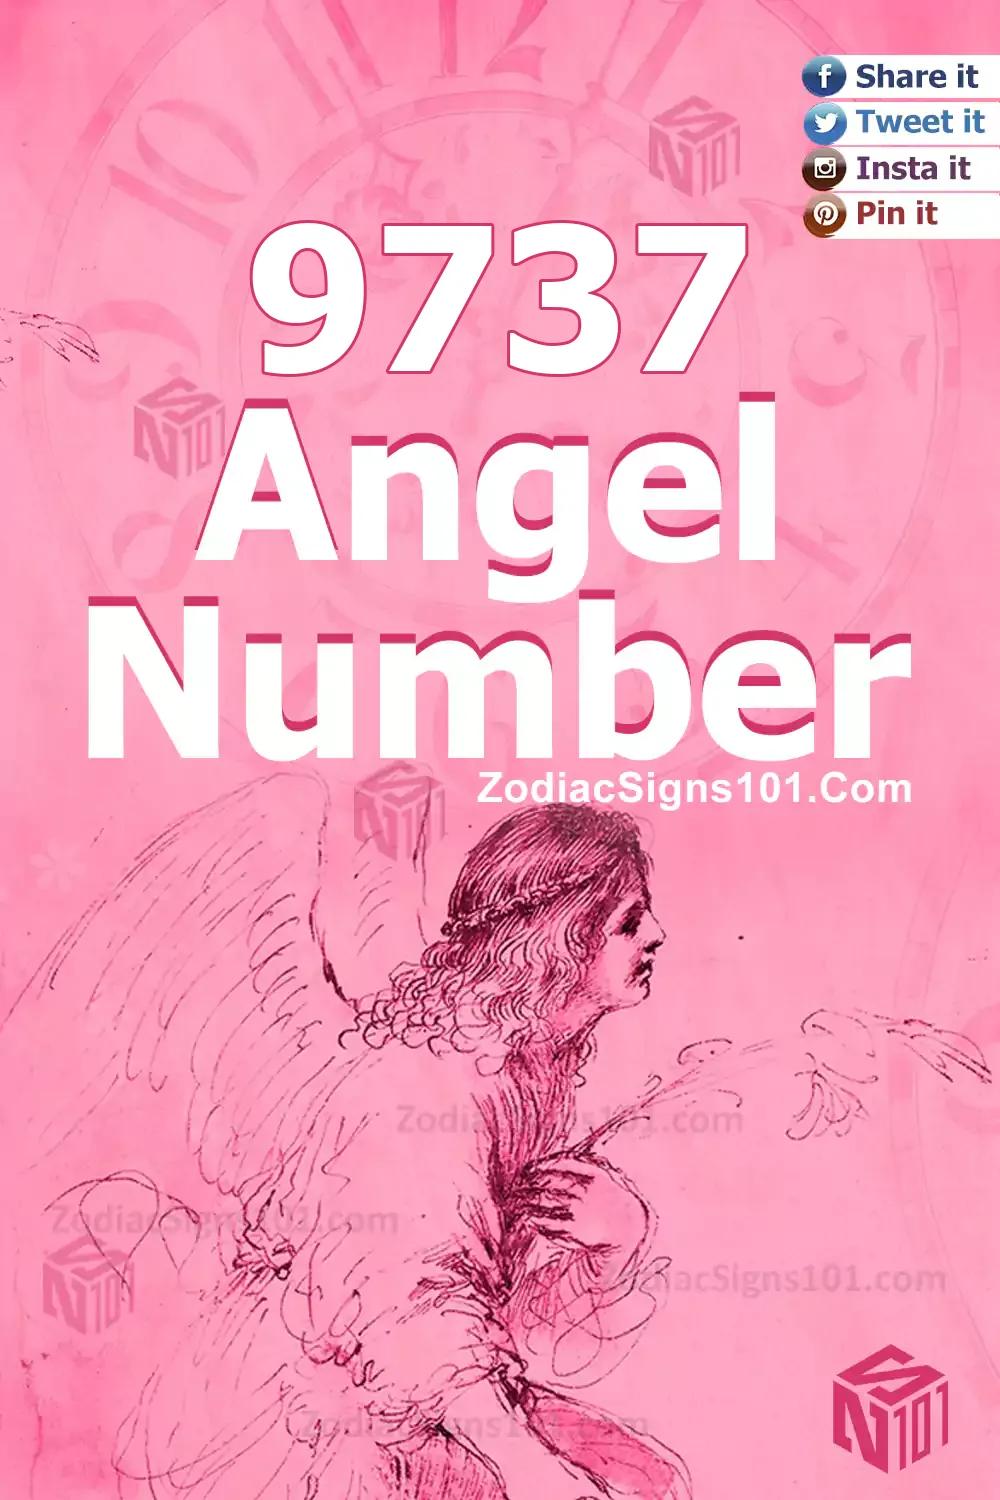 9737 Angel Number Meaning